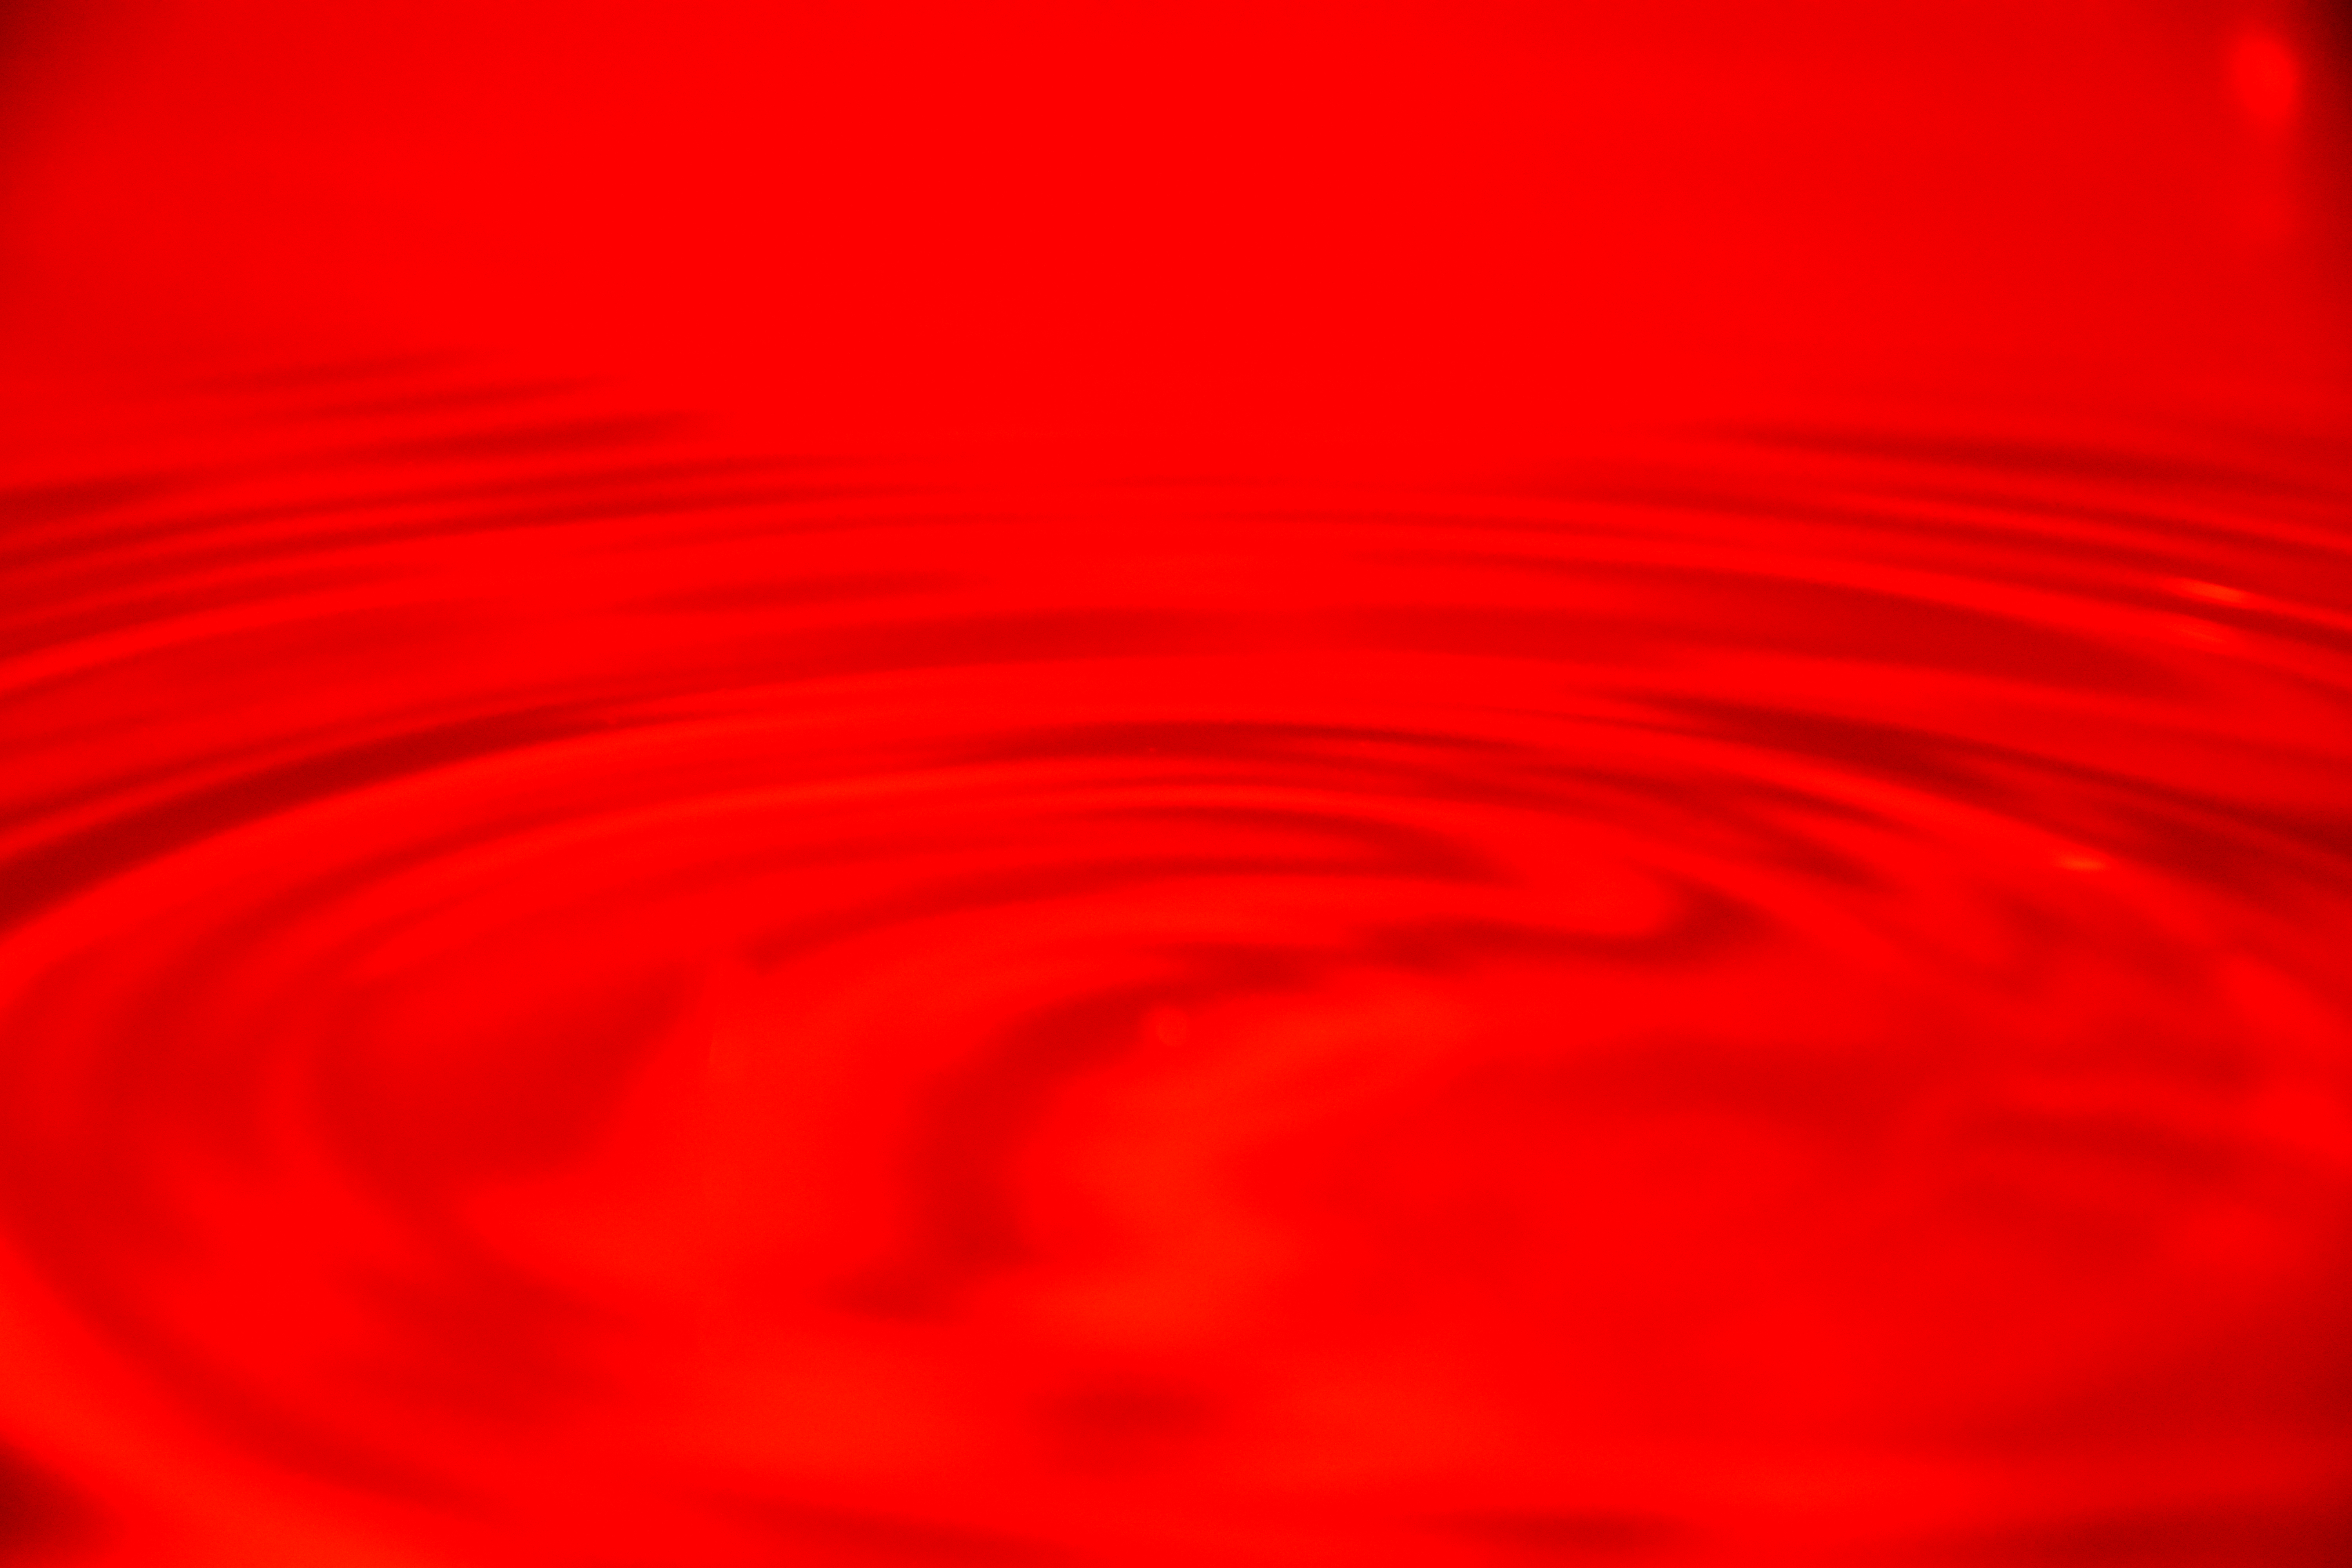 File:Red Water.jpg - Wikimedia Commons